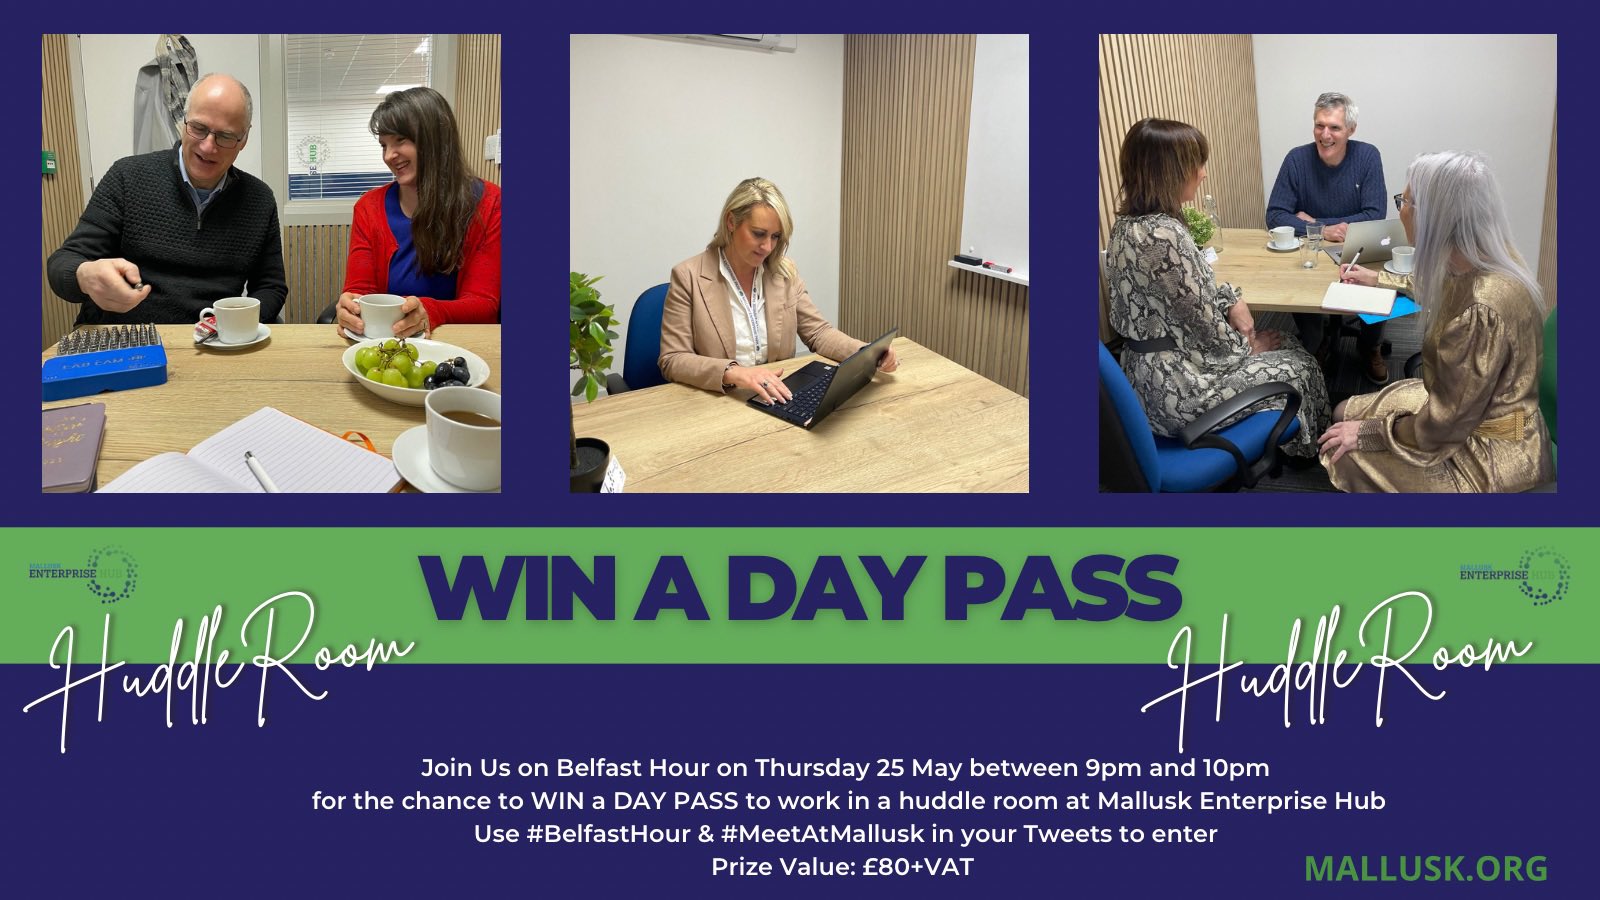 Win an excellent HUDDLE ROOM DAY PASS from and with featured business @MalluskInfo! #MeetAtMallusk